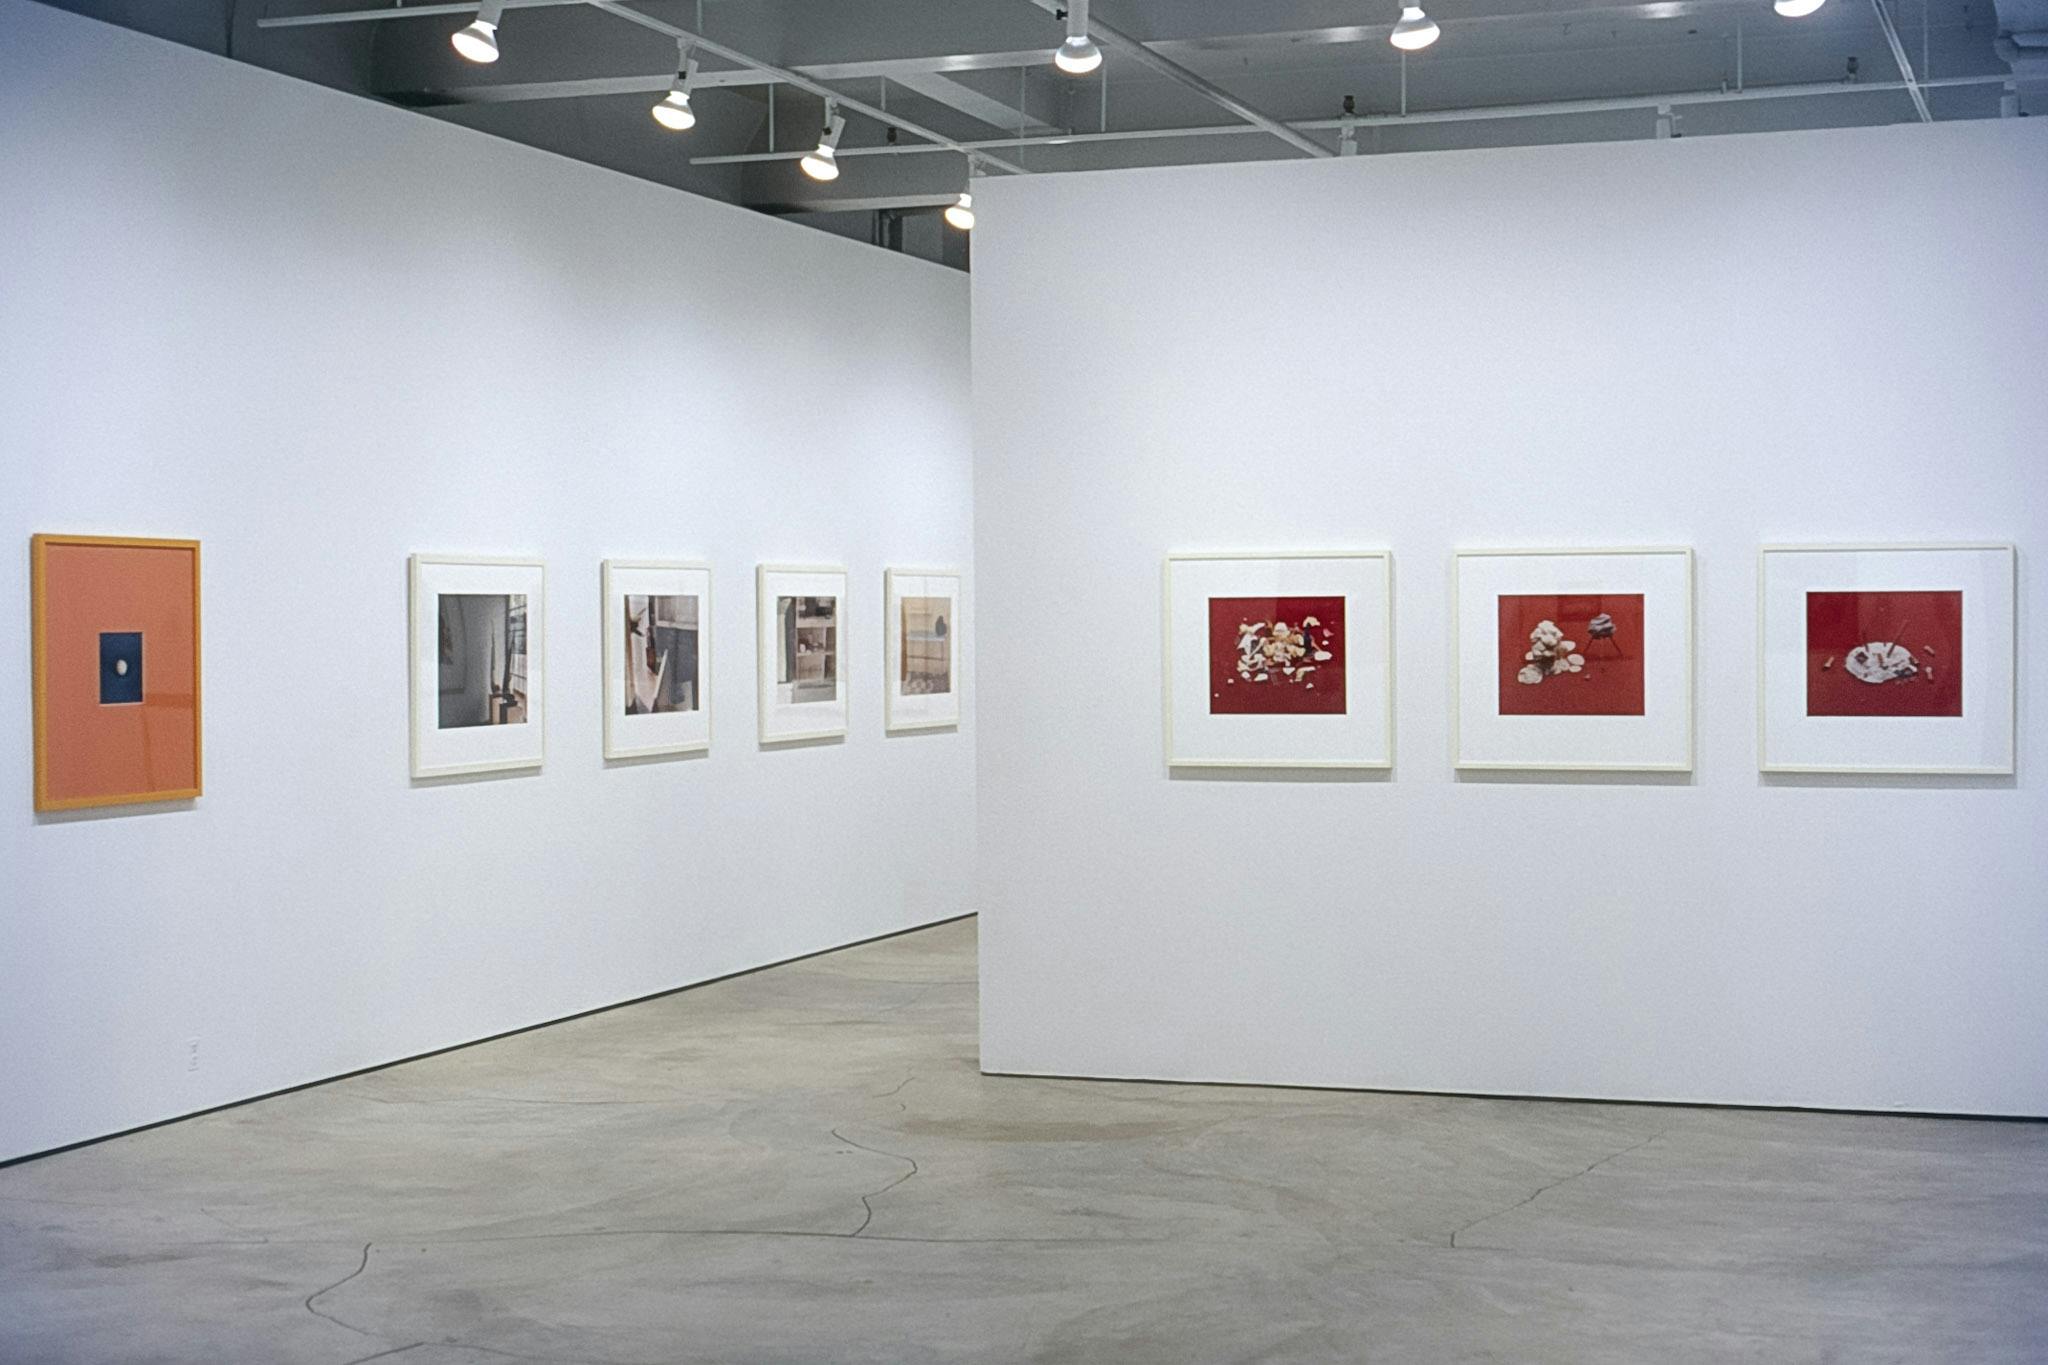 Eight photo pieces are mounted on gallery walls. Three on the front wall depict white organic shapes assembled in the red background. Four in the back are photographs of house interiors.  